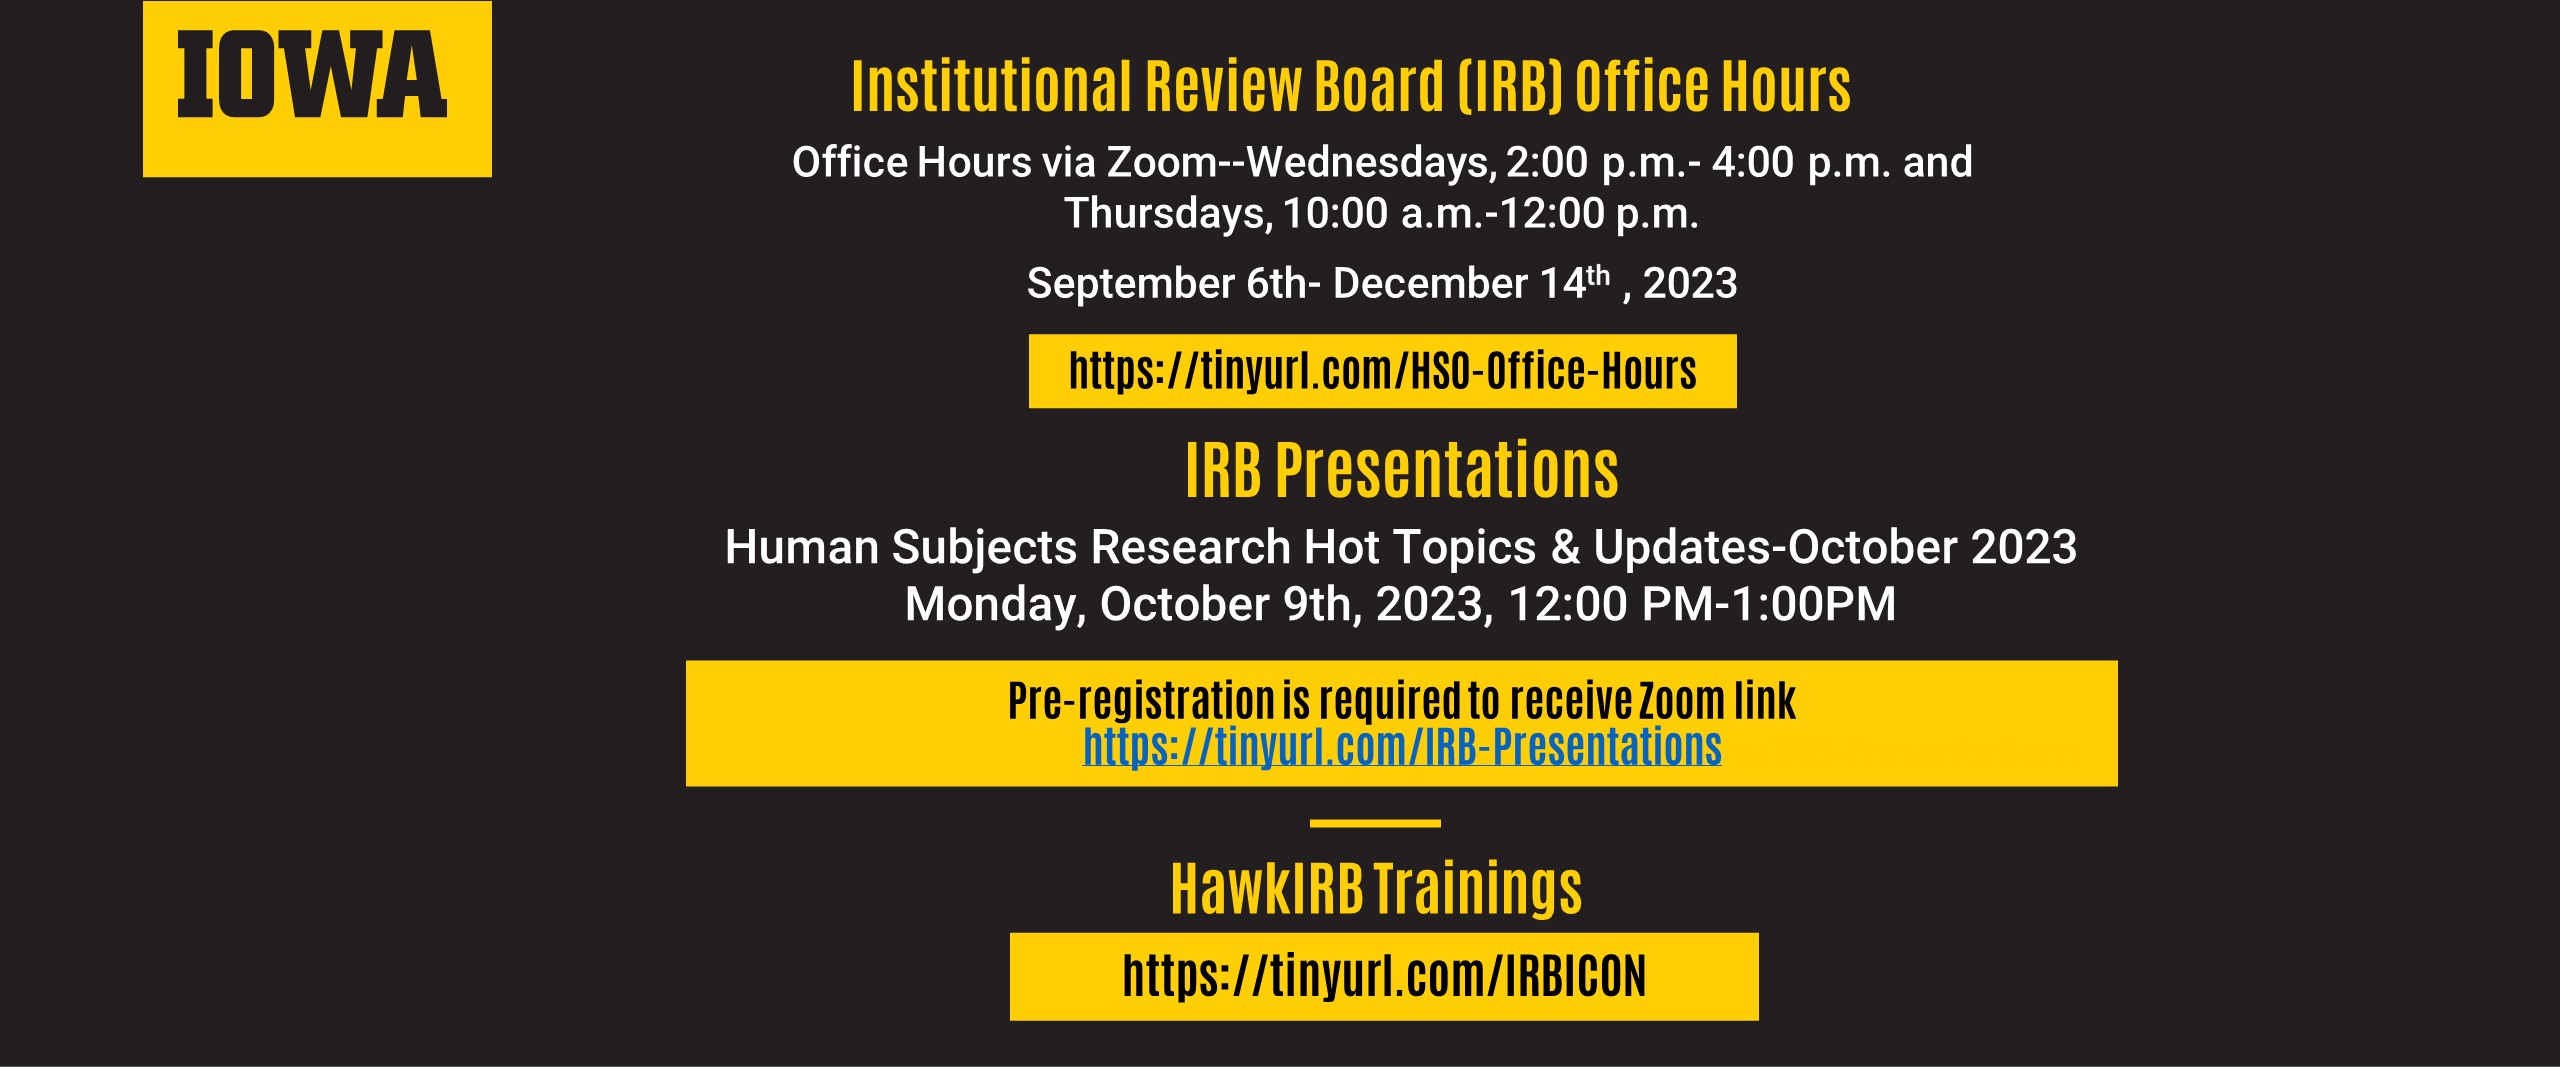 IRB/HSO Upcoming Presentations and Office Hours